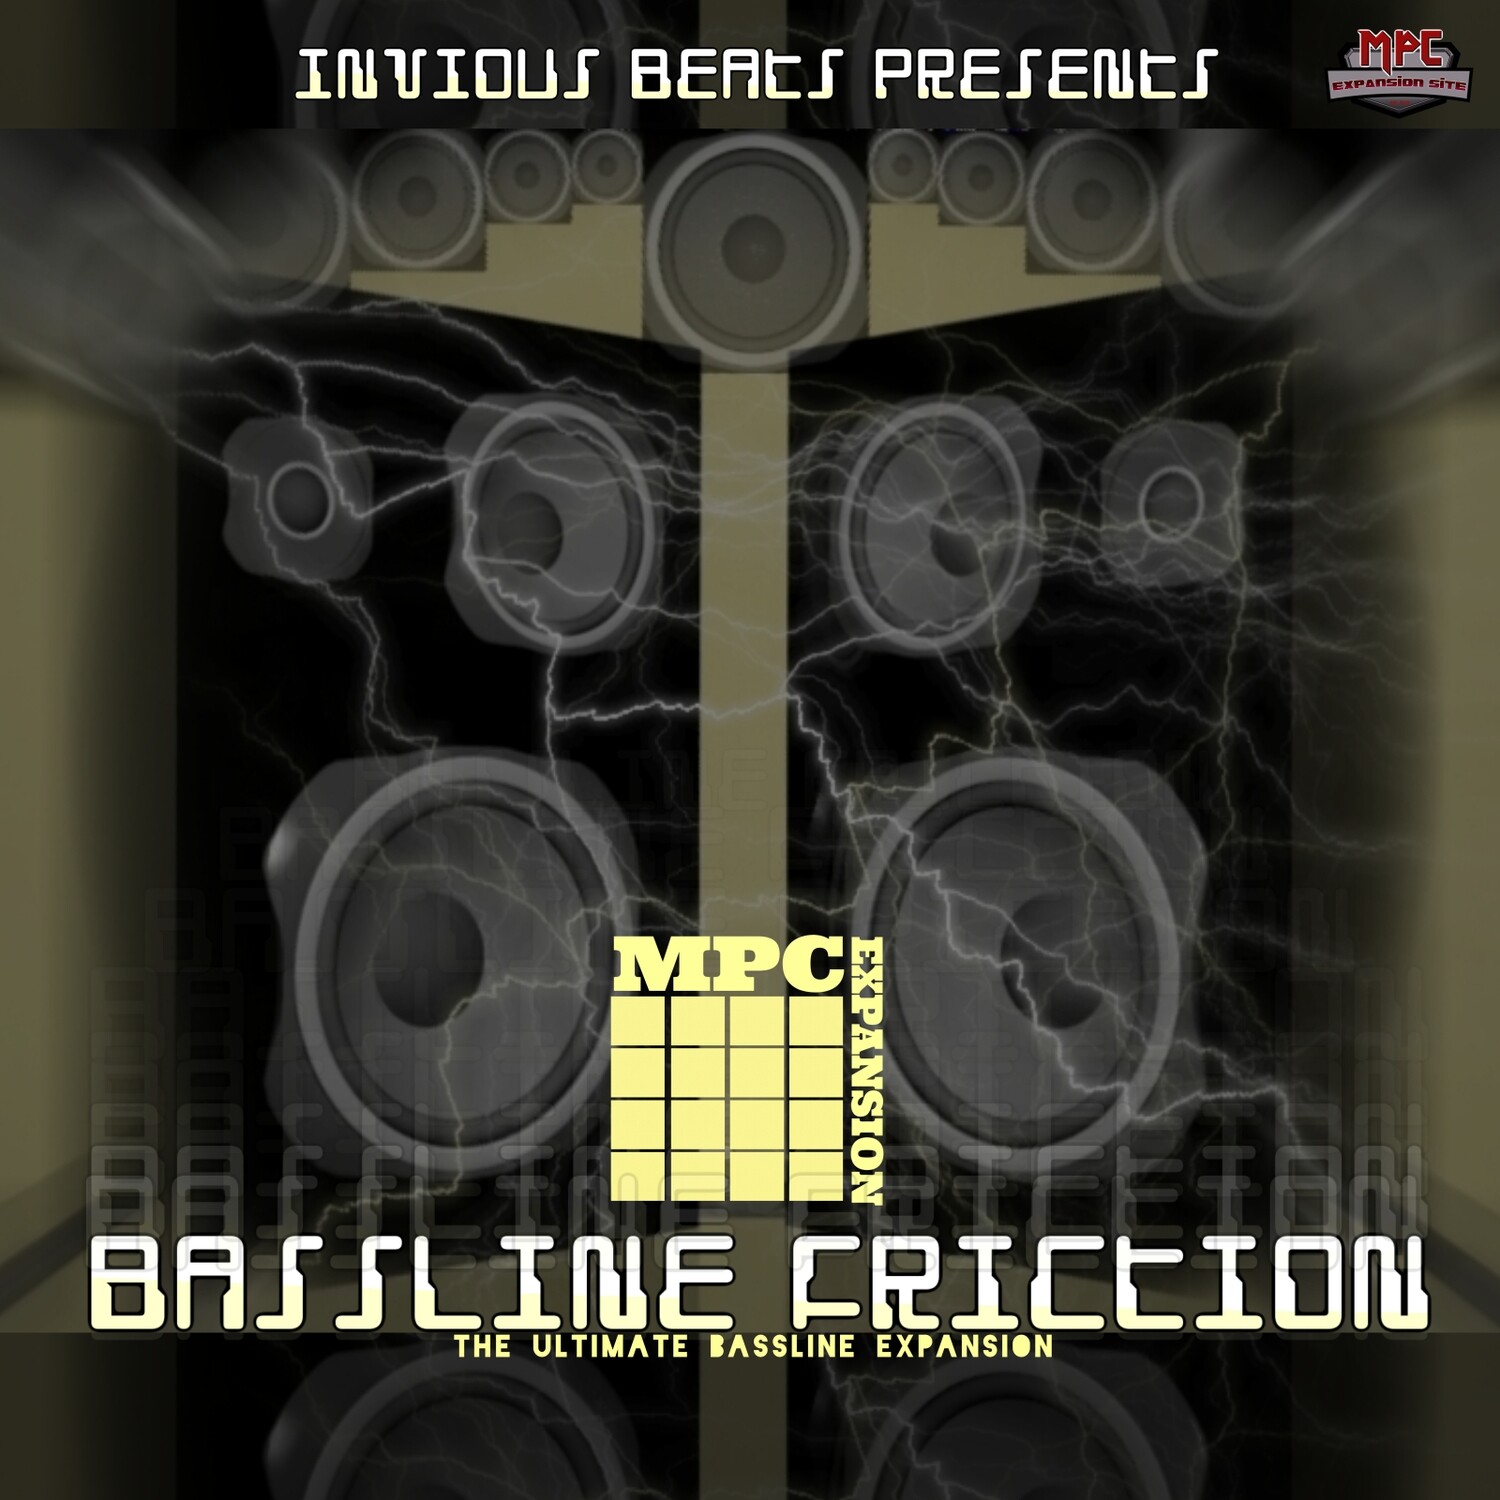 MPC EXPANSION 'BASSLINE FRICTION' by INVIOUS